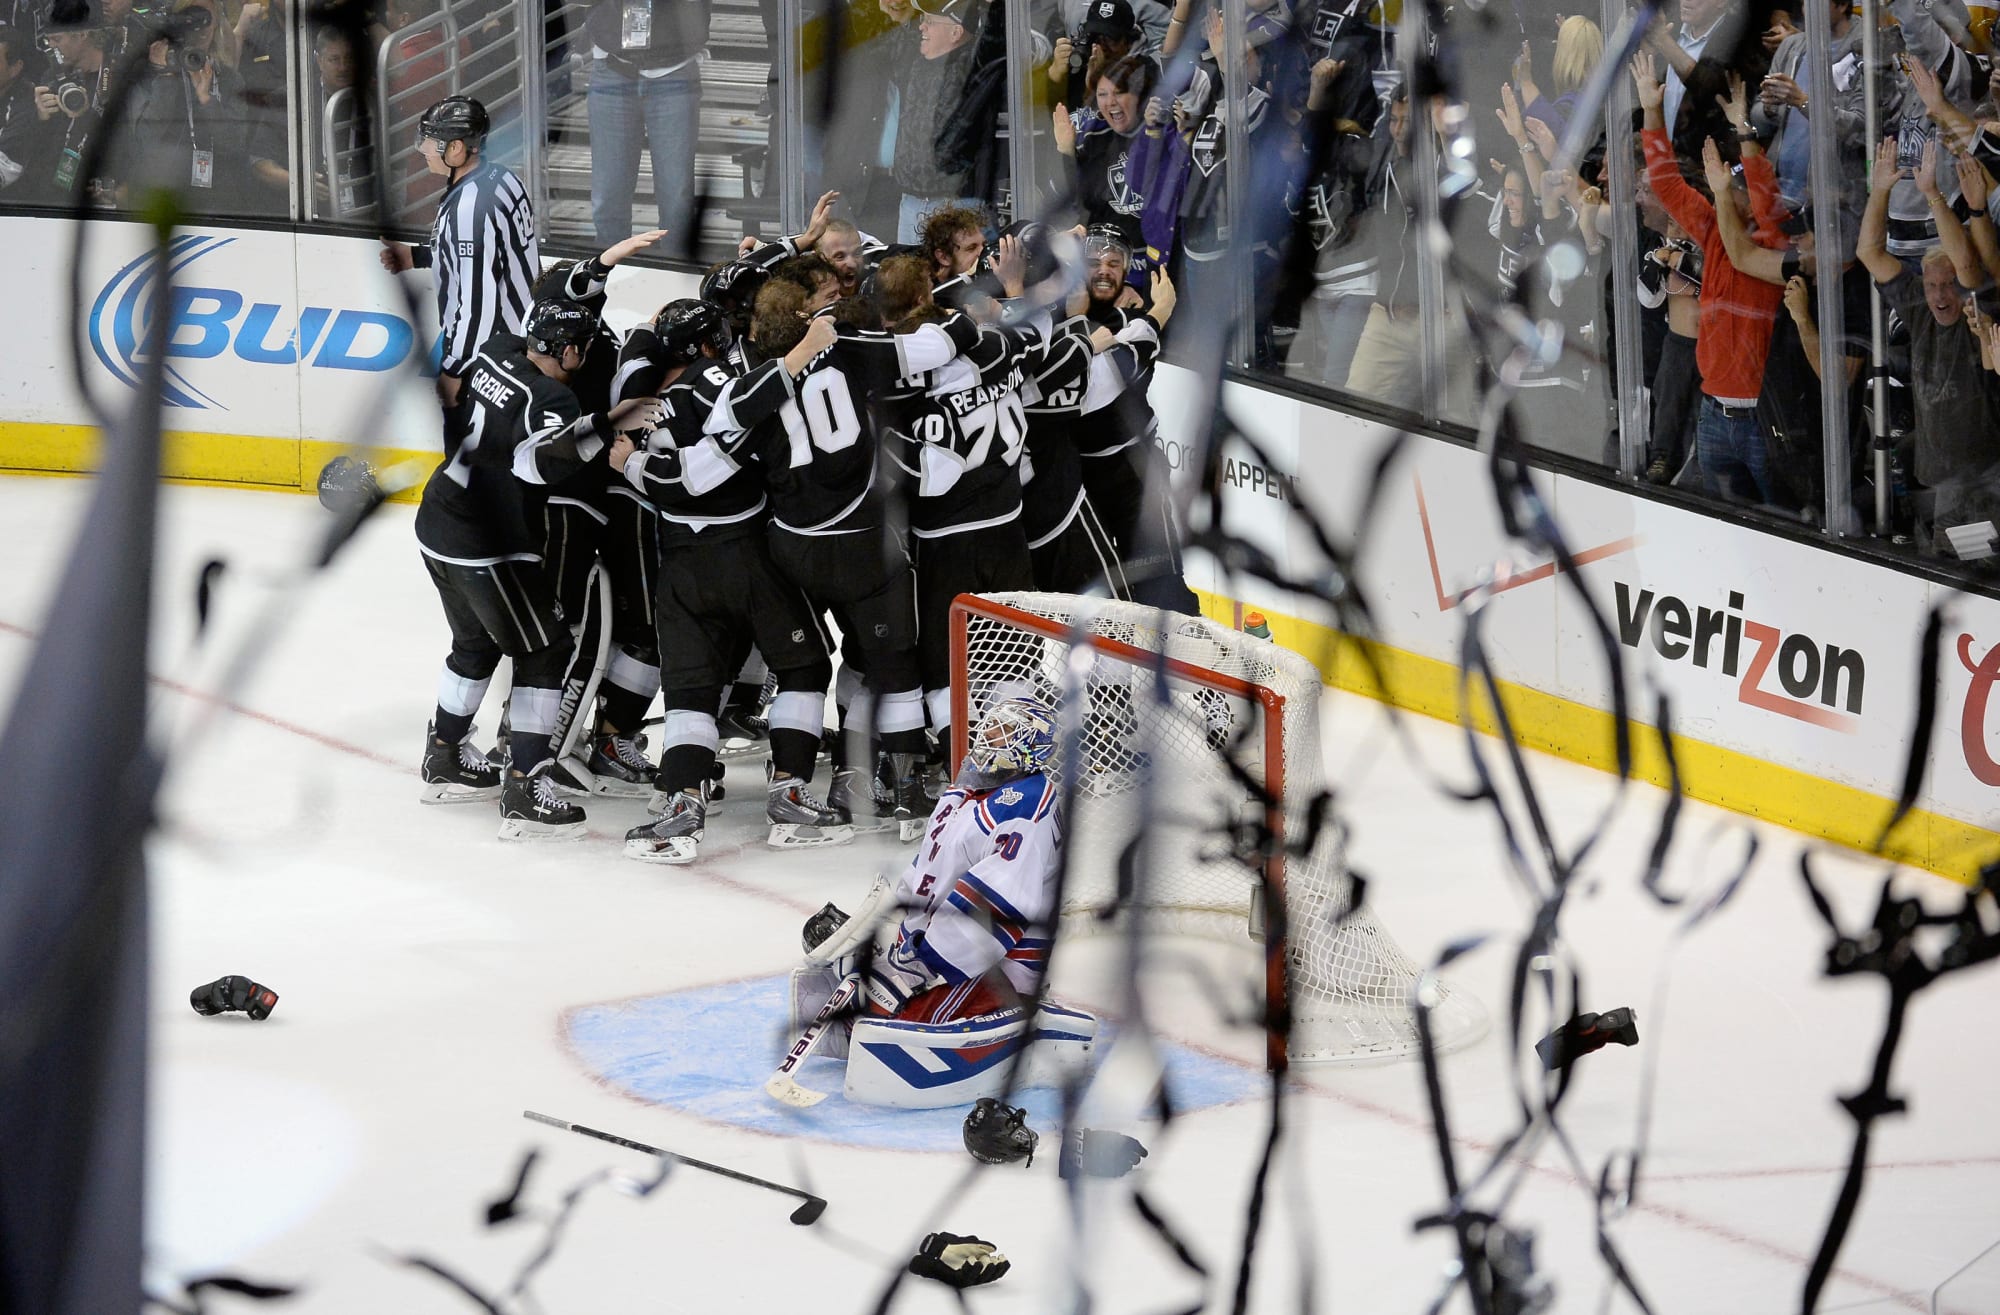 Stanley Cup: Los Angeles Kings move 2-0 up on New York Rangers thanks to Dustin  Brown, Ice Hockey News